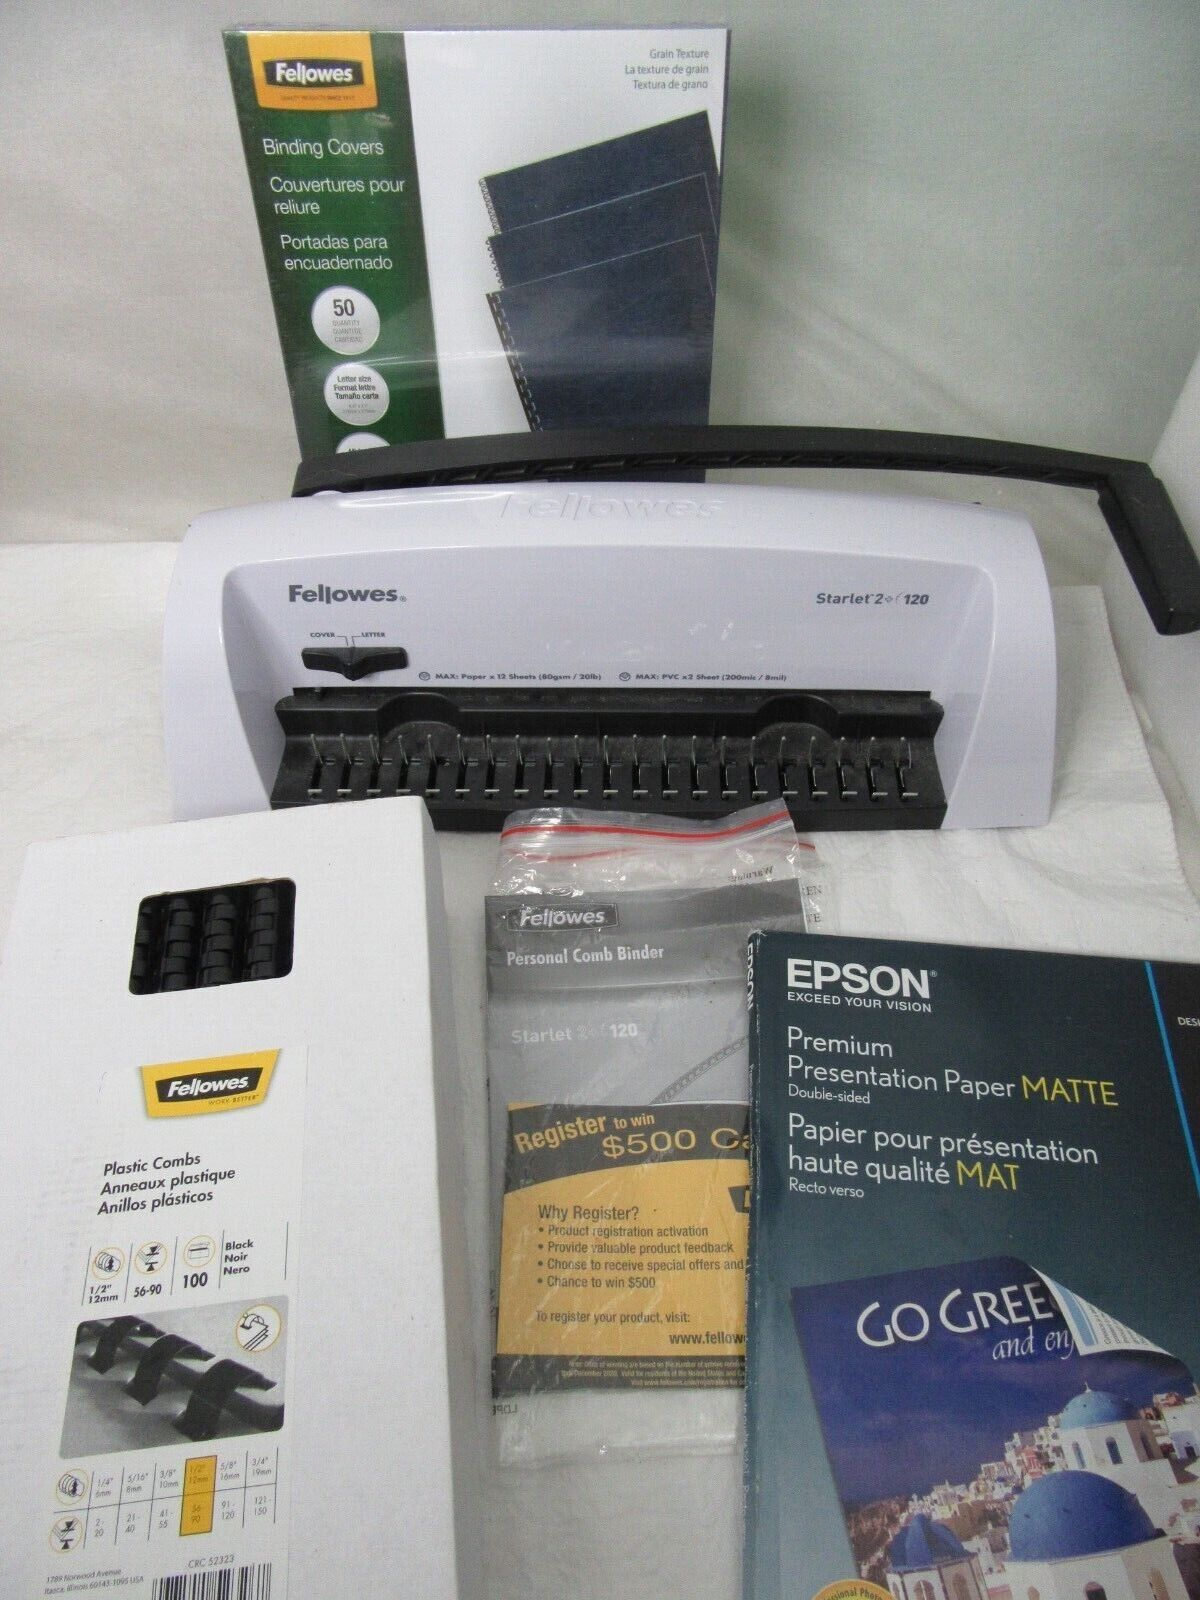 Fellowes Starlet 2+ 120 Personal Comb Binder With Accessories